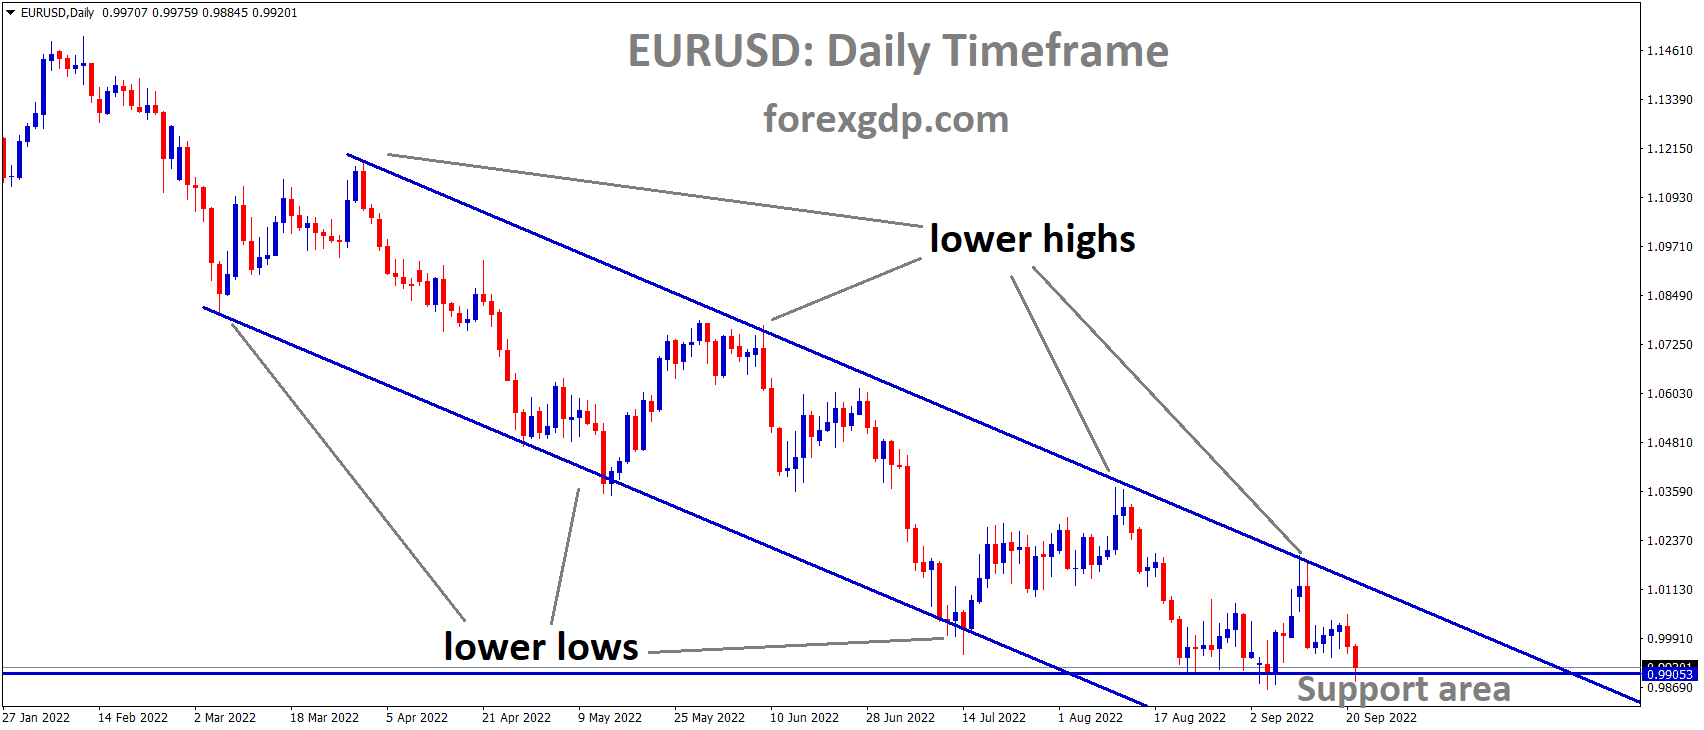 EURUSD is moving in the Descending channel and the market has reached the horizontal support area of the channel.